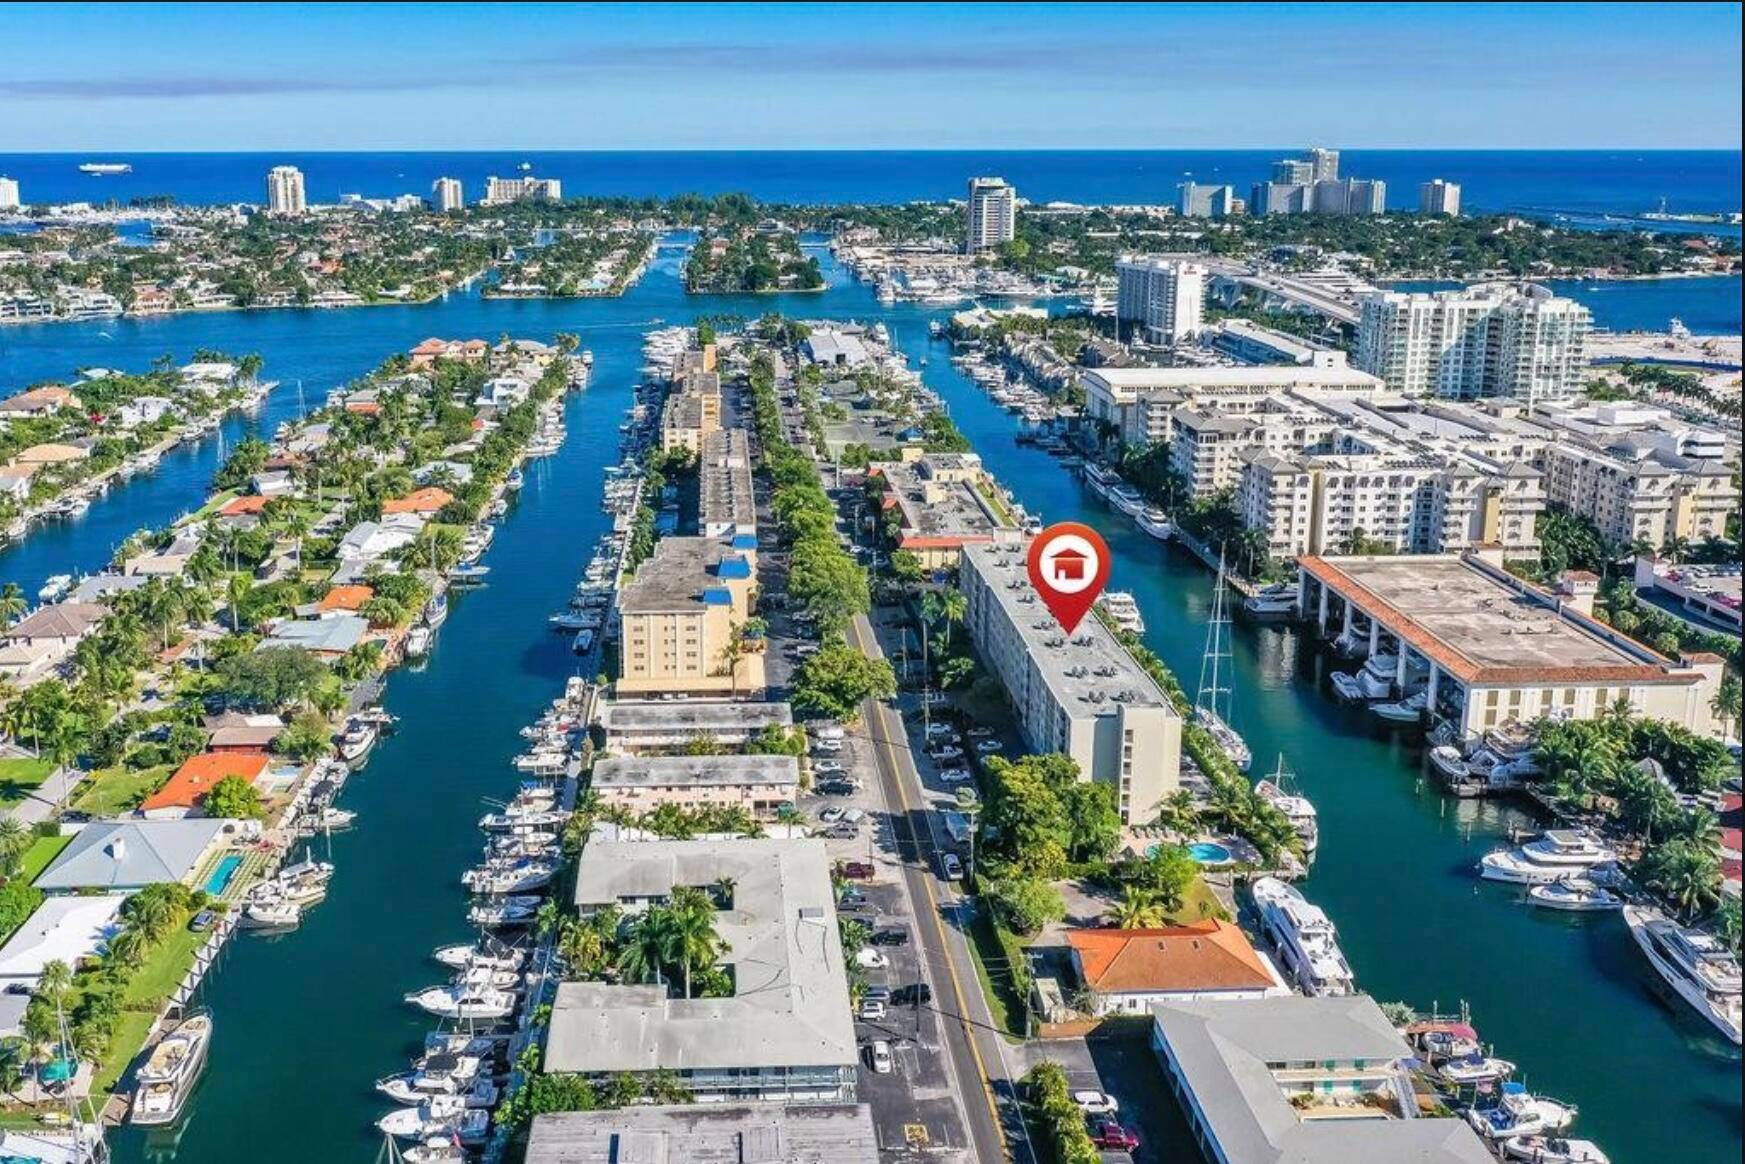 Waterfront 2 2 condominium, located East of US 1, in one of the most desirable spots in Fort Lauderdale, great location for boating and entertainment activities.